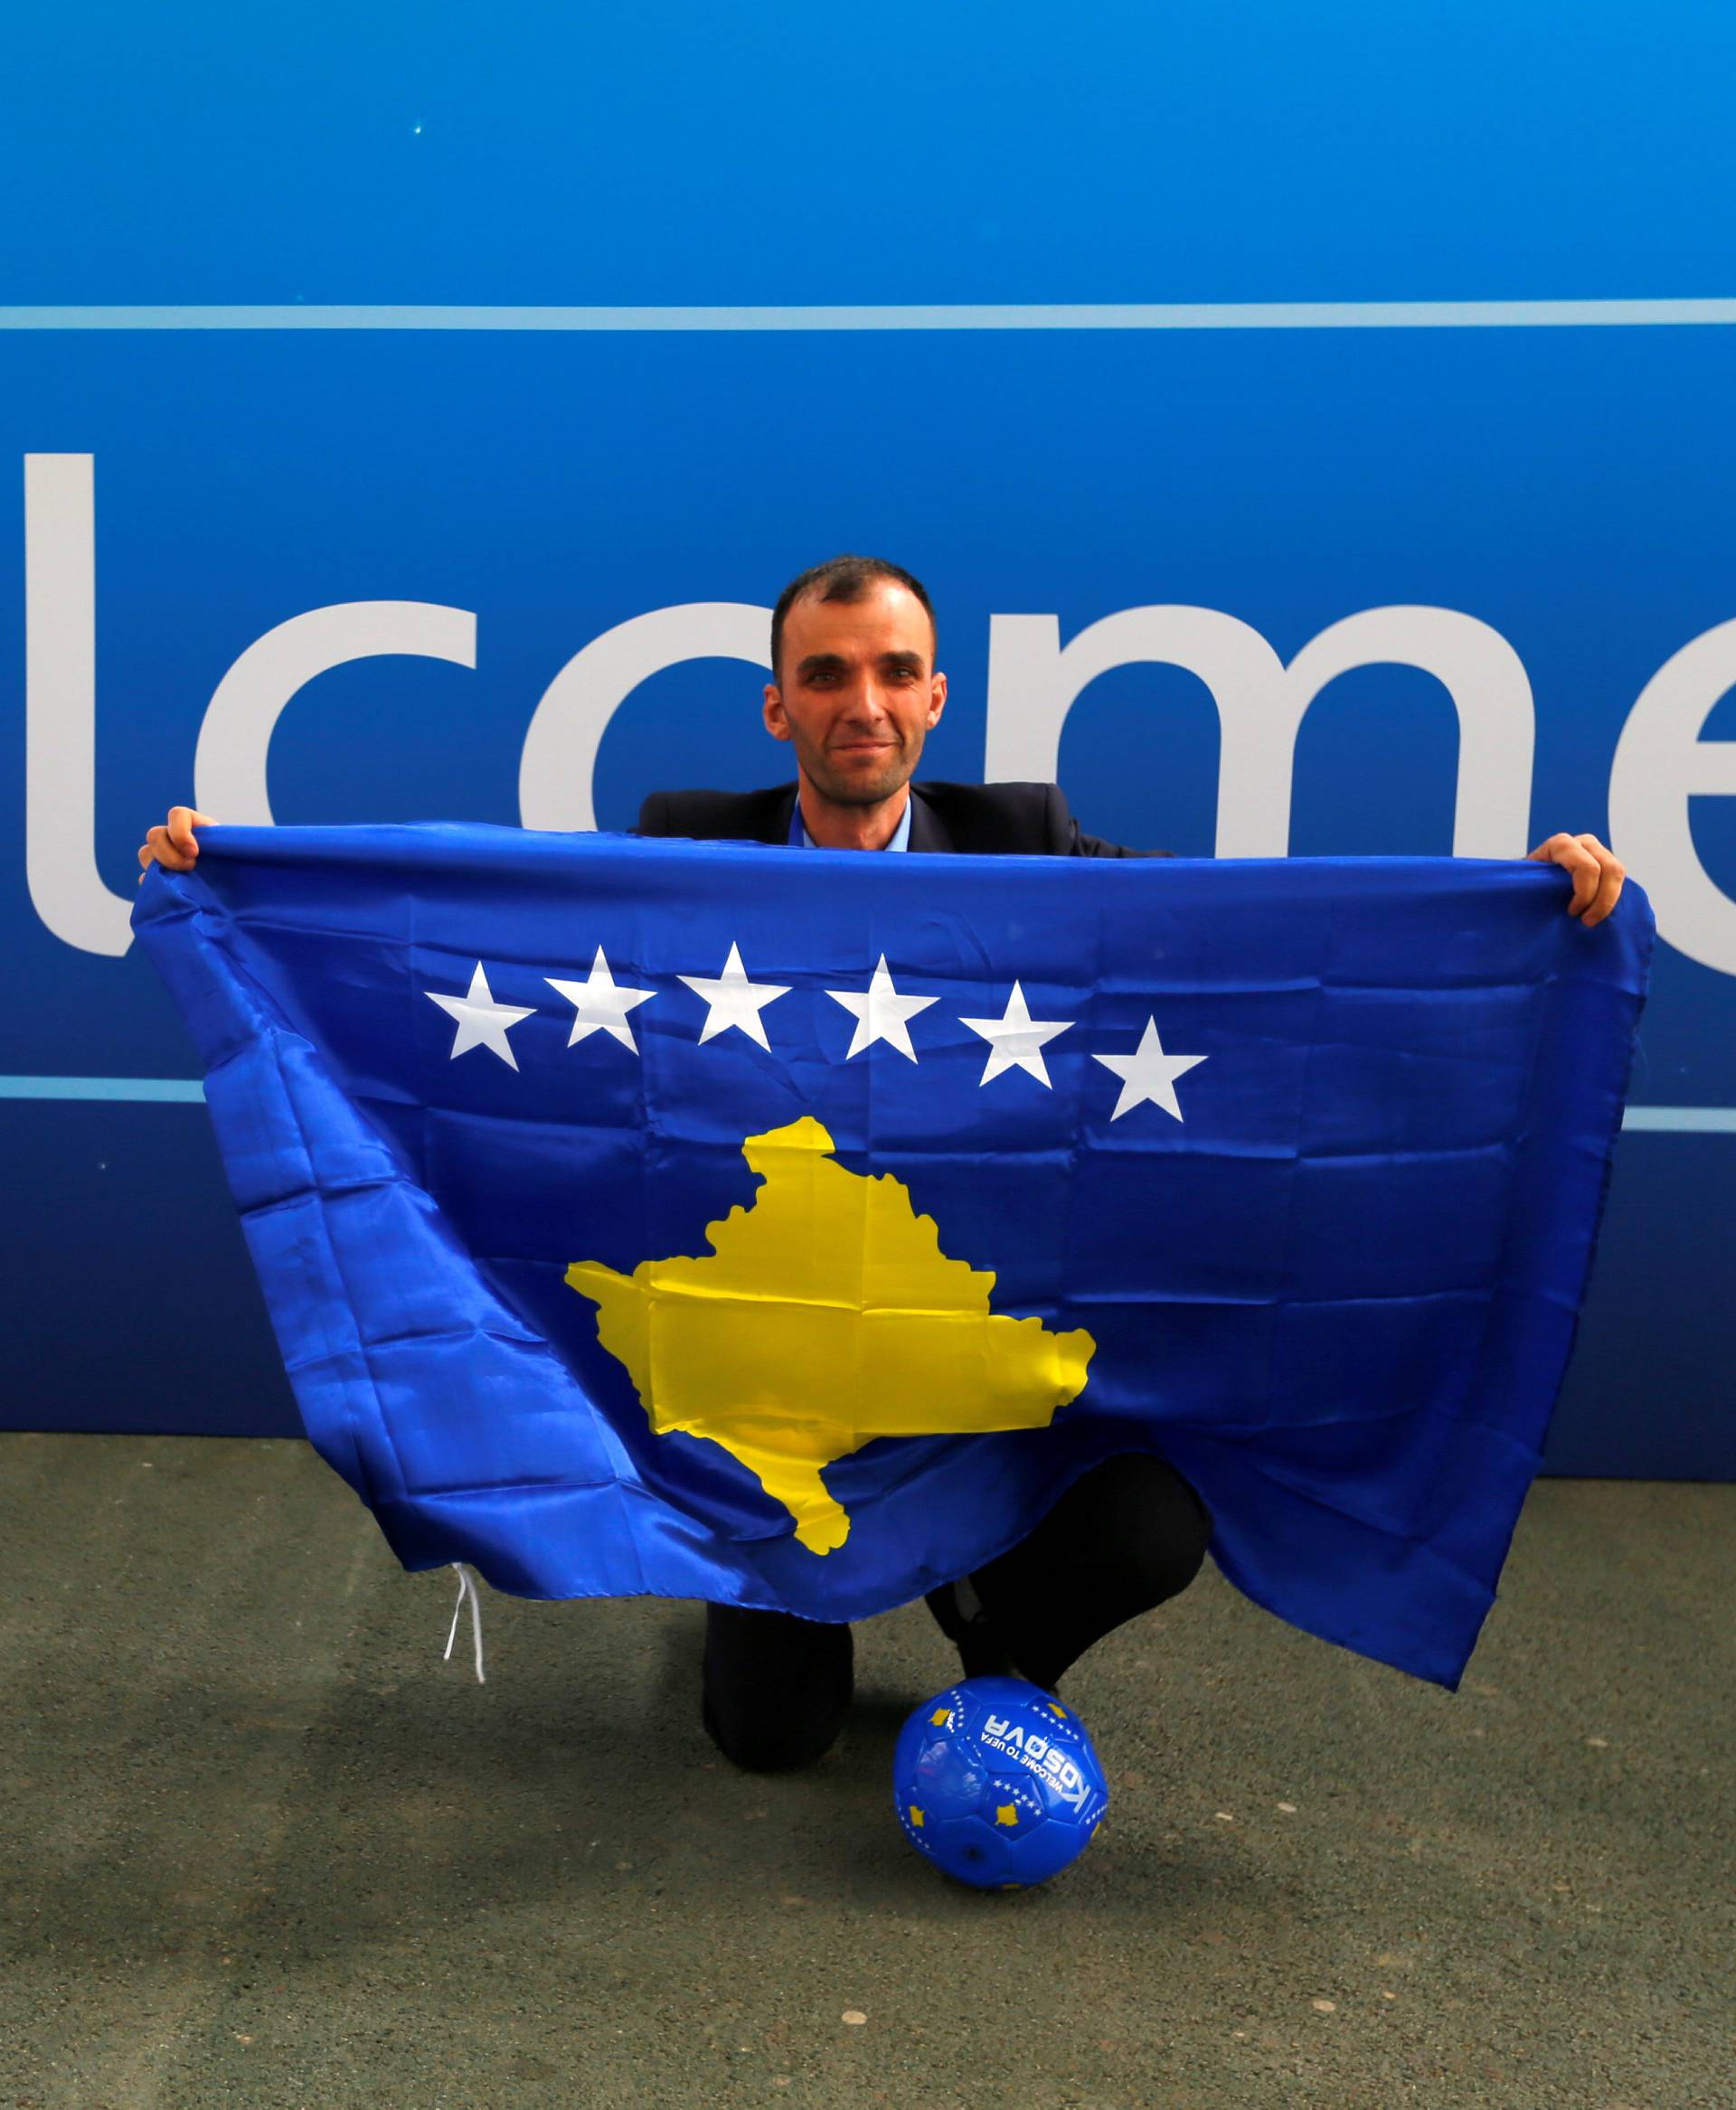 A member of the Kosovo media team celebrates outside the convention centre where the European football group UEFA admitted Kosovo as its newest member in Budapest